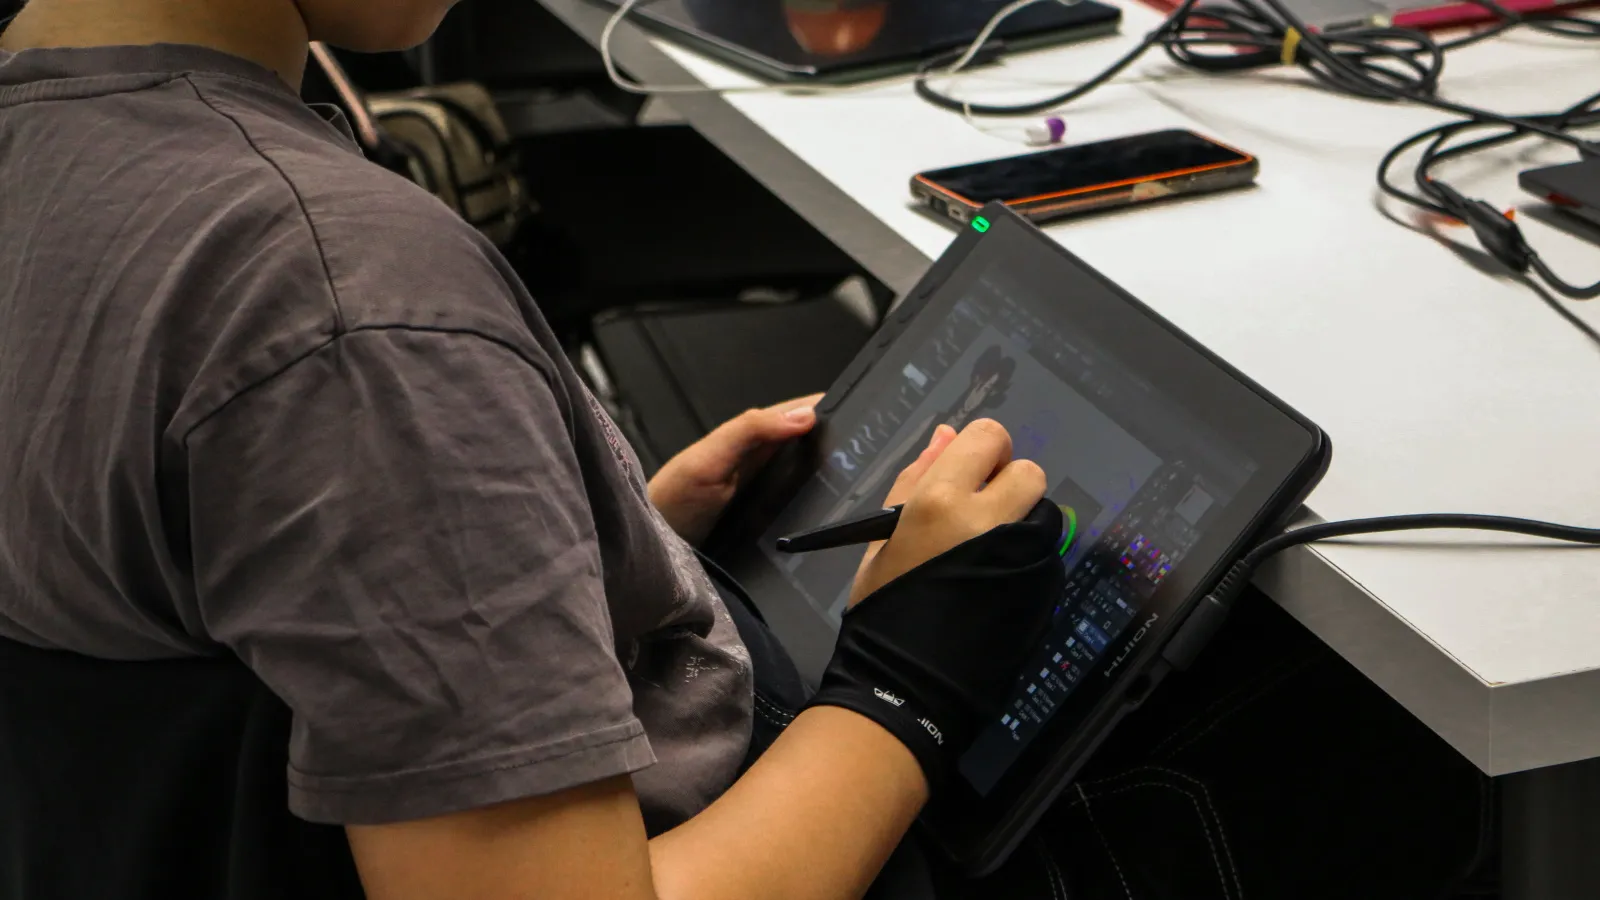 A student using a drawing glove and a graphic tablet working on the assignment